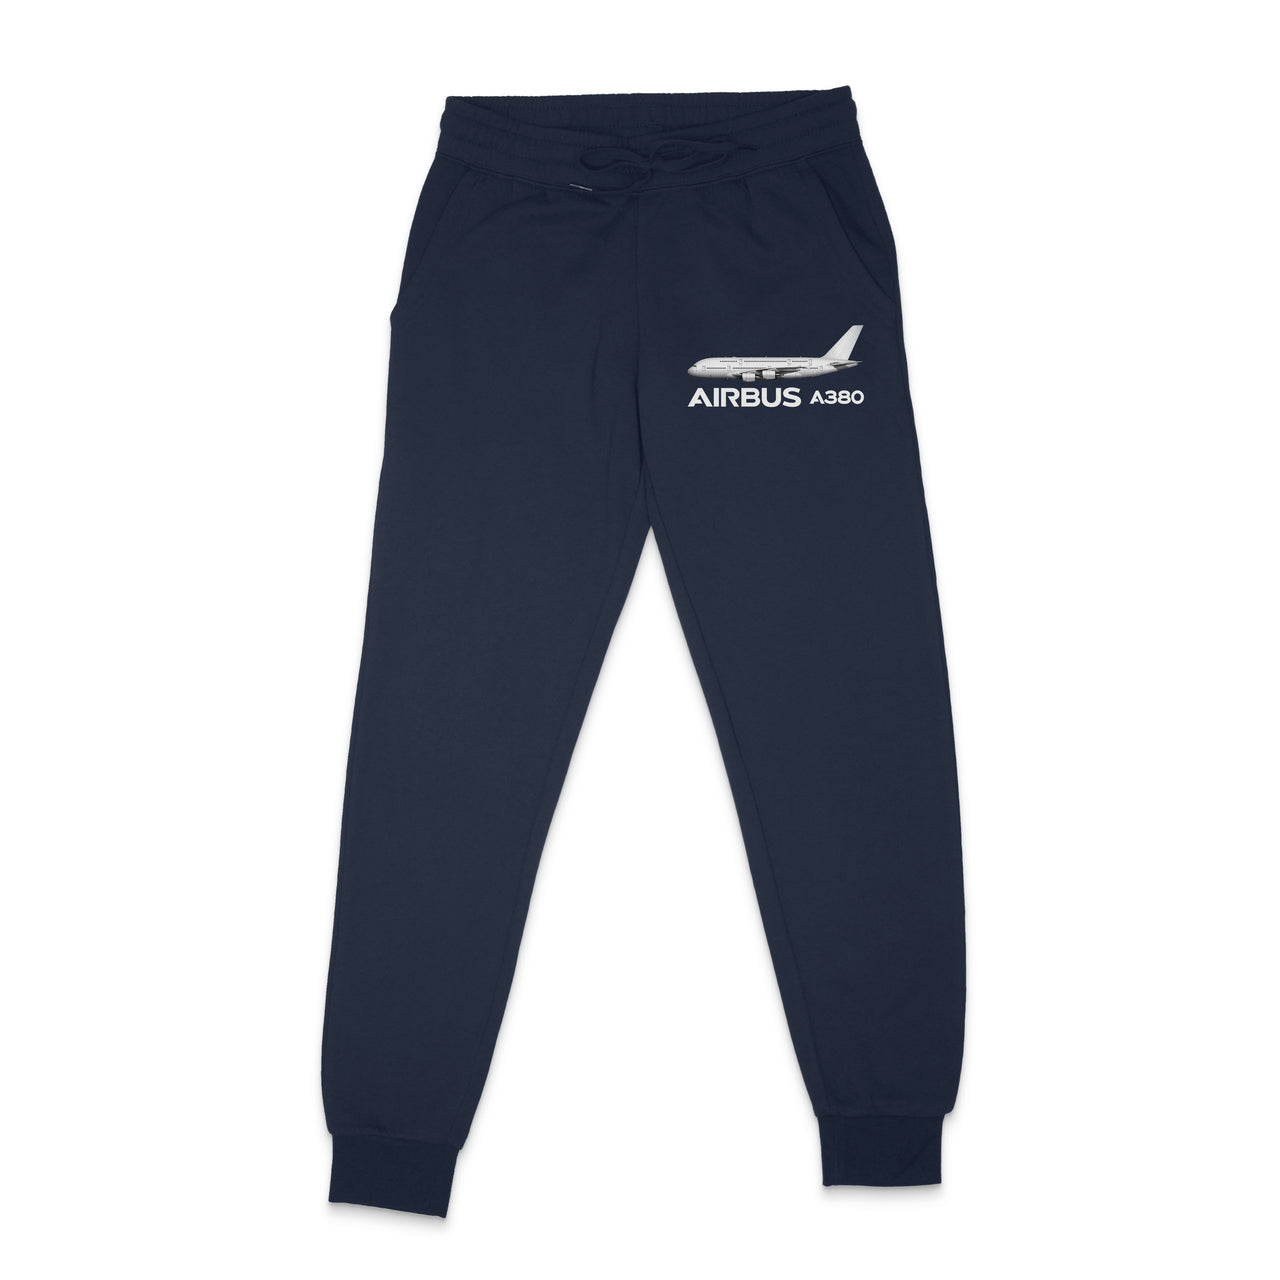 The Airbus A380 Designed Sweatpants